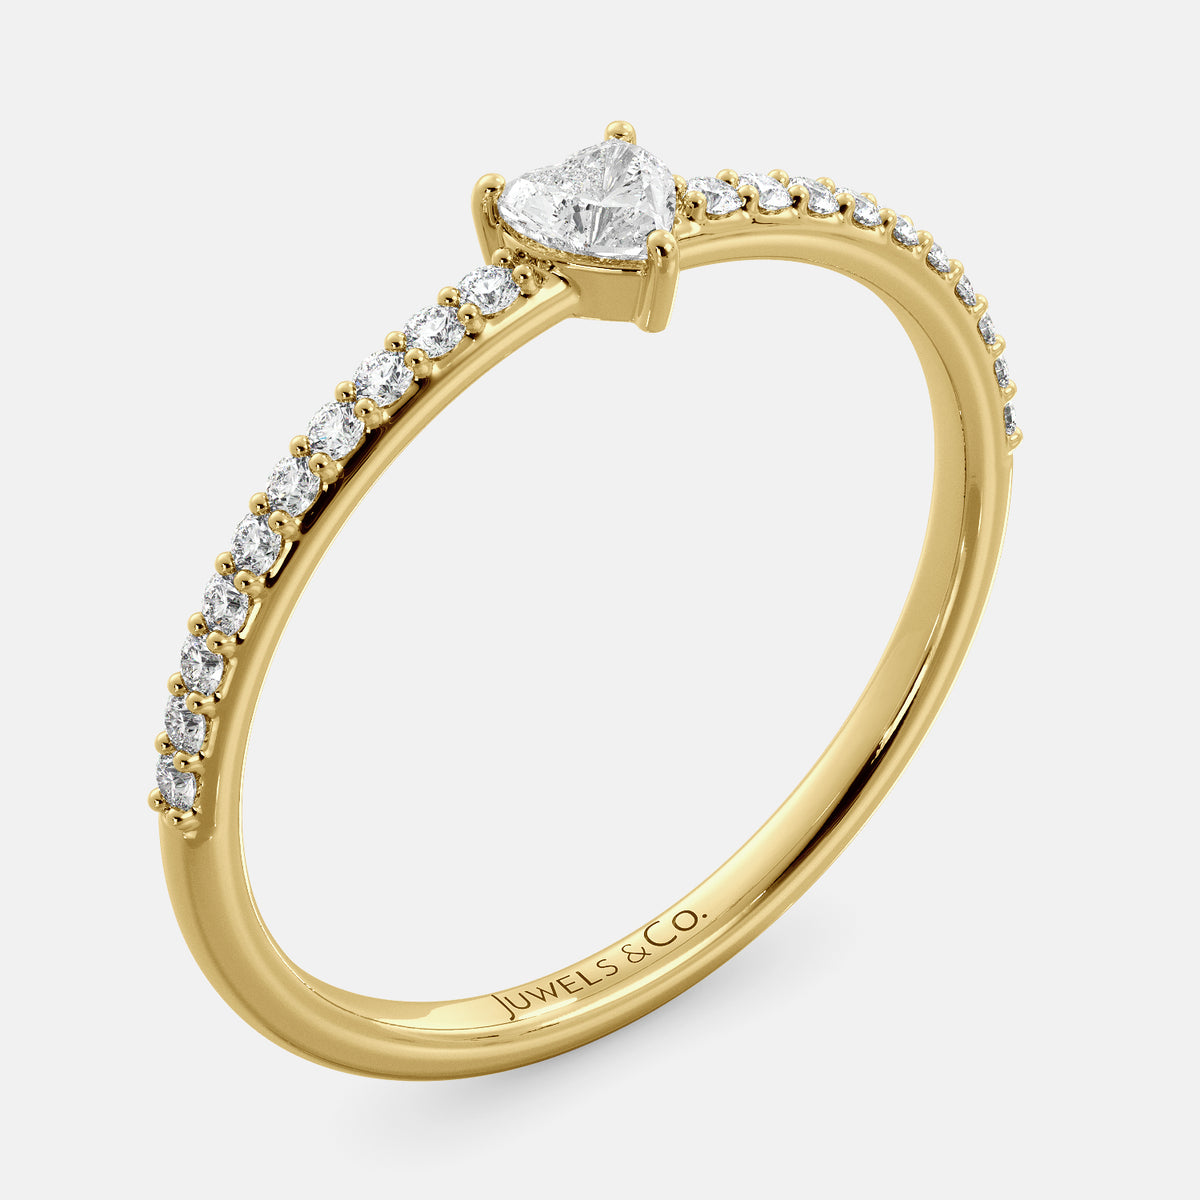 A close-up of a heart-shaped diamond ring with side stones in recycled yellow gold. The ring is set with a single, large diamond in the center of a heart-shaped setting. The ring is made of recycled yellow gold and has a simple, elegant design. The diamond is sparkling and reflects light beautifully. The side stones are smaller diamonds that are set in the band of the ring. The ring is a perfect gift for a loved one or a special occasion.